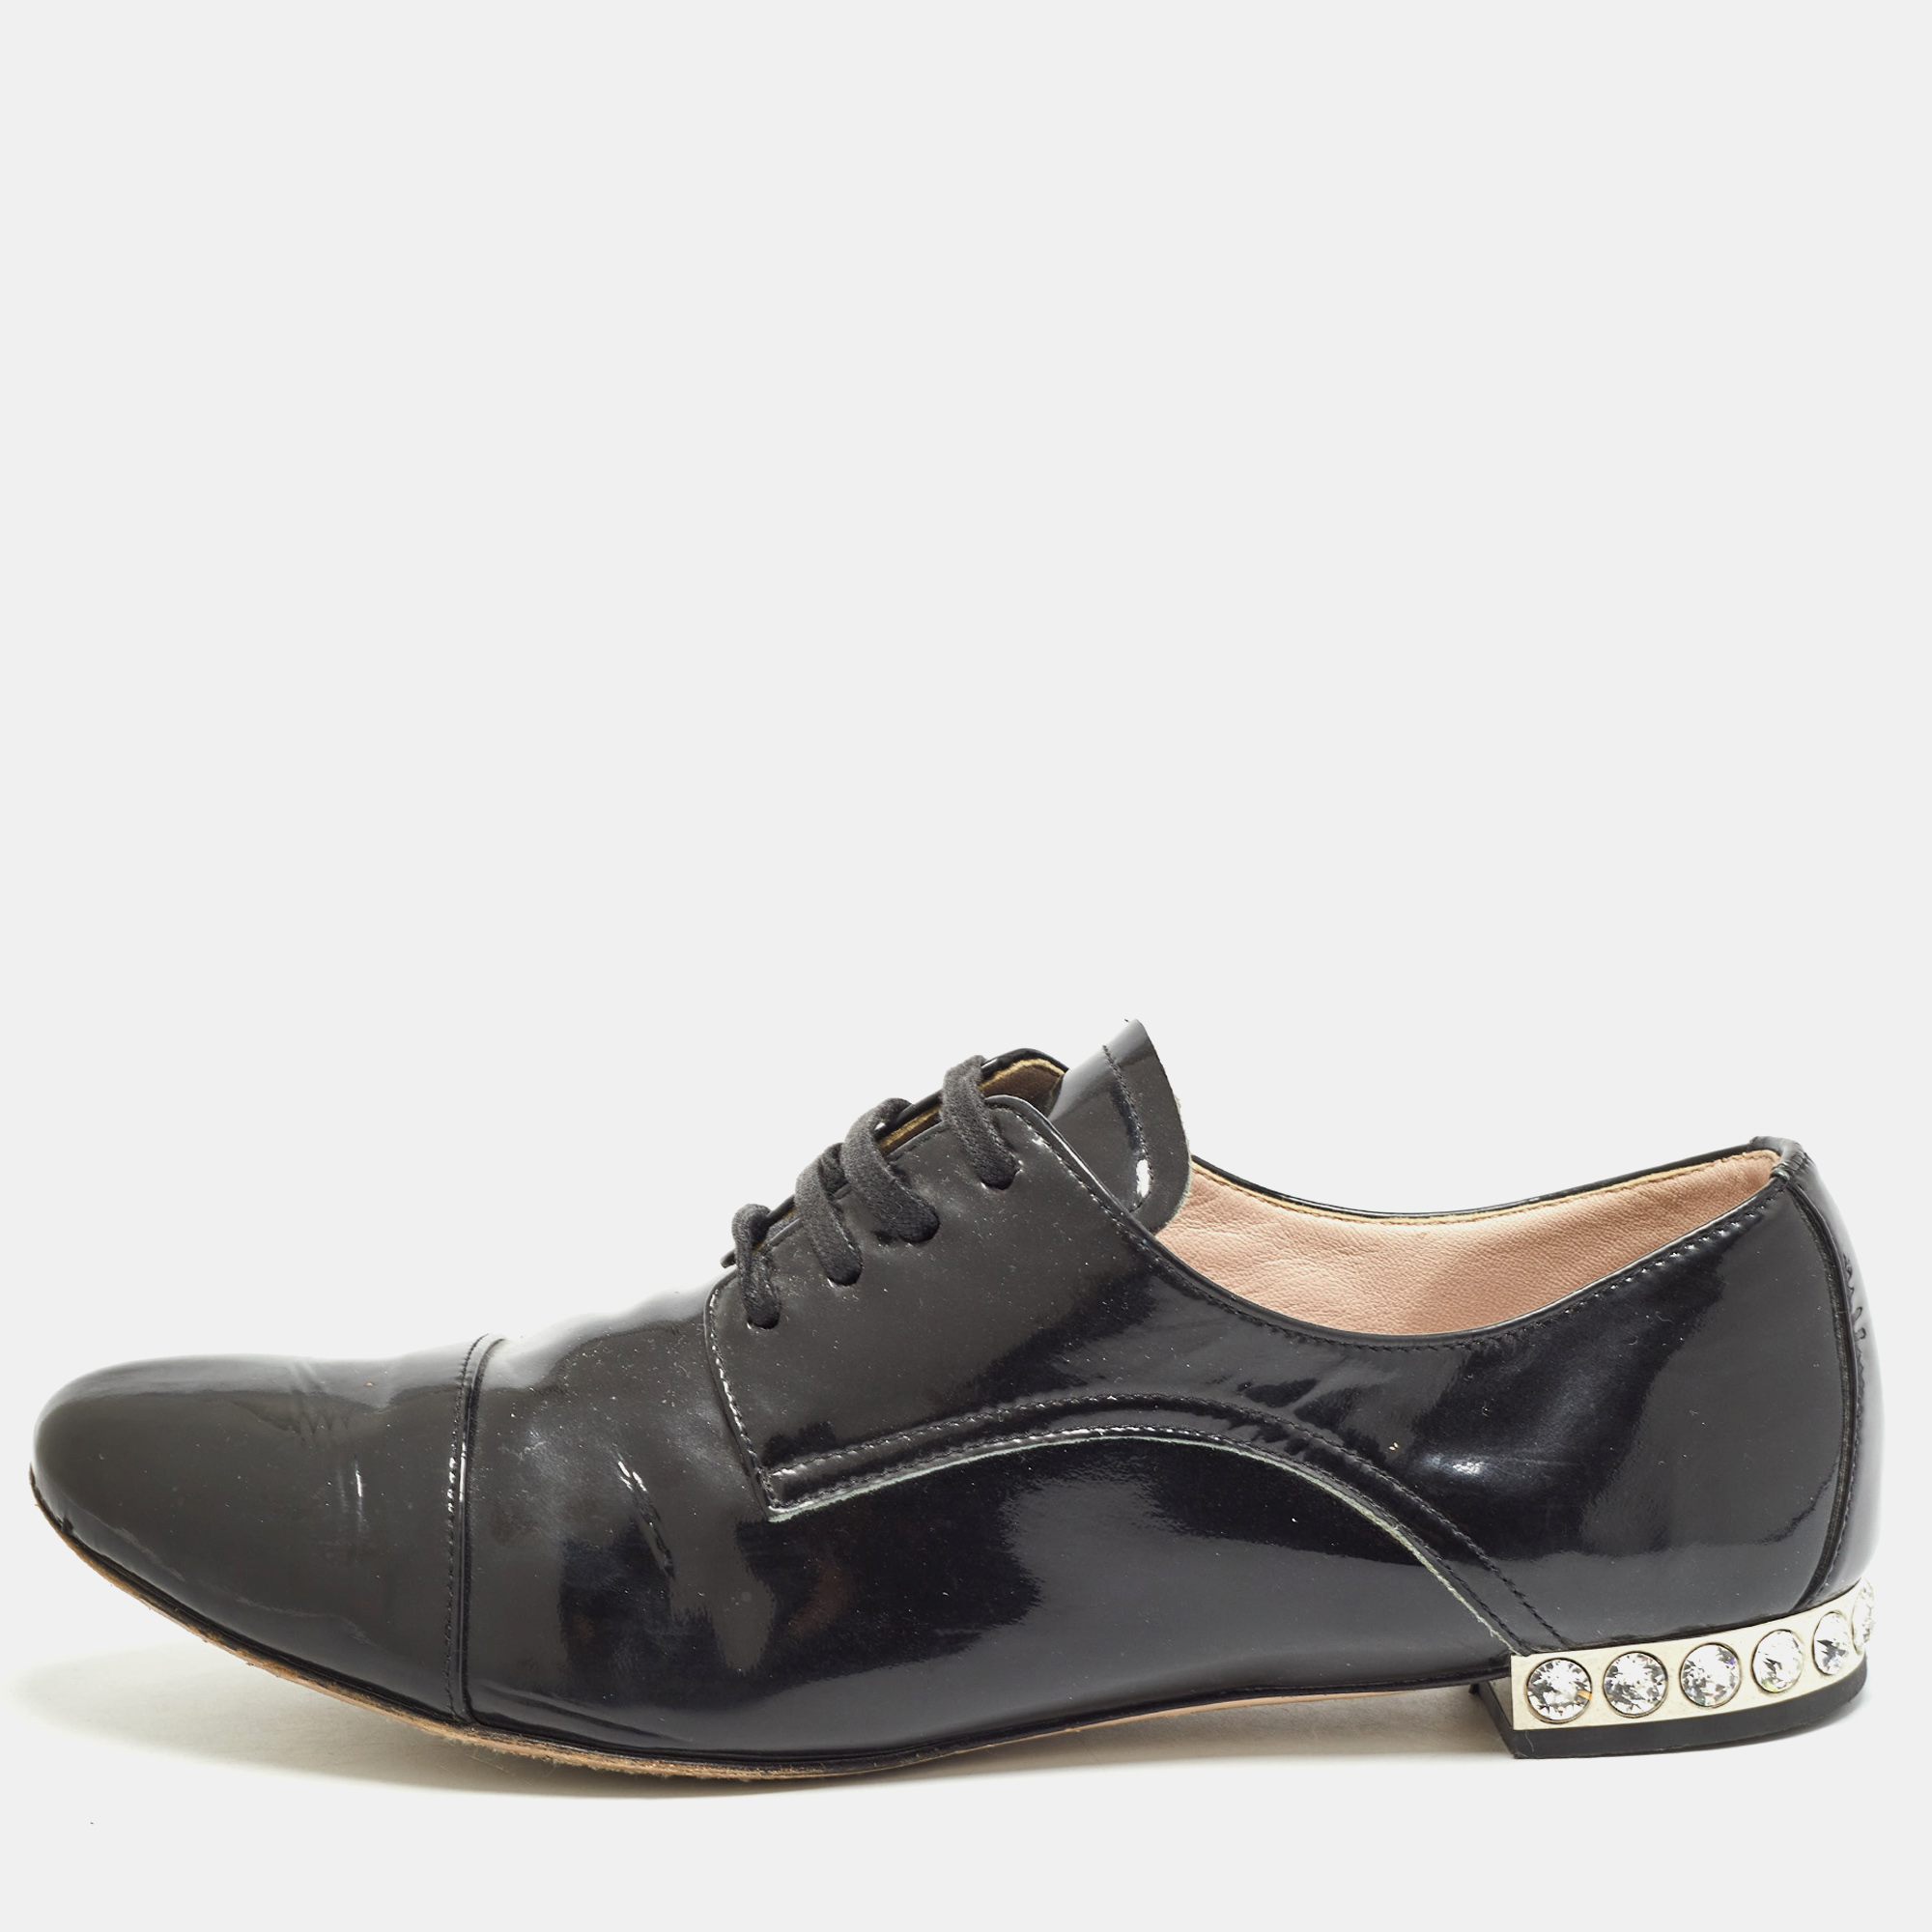 

Miu Miu Black Patent Leather Crystal Embellished Lace Up Derby Size